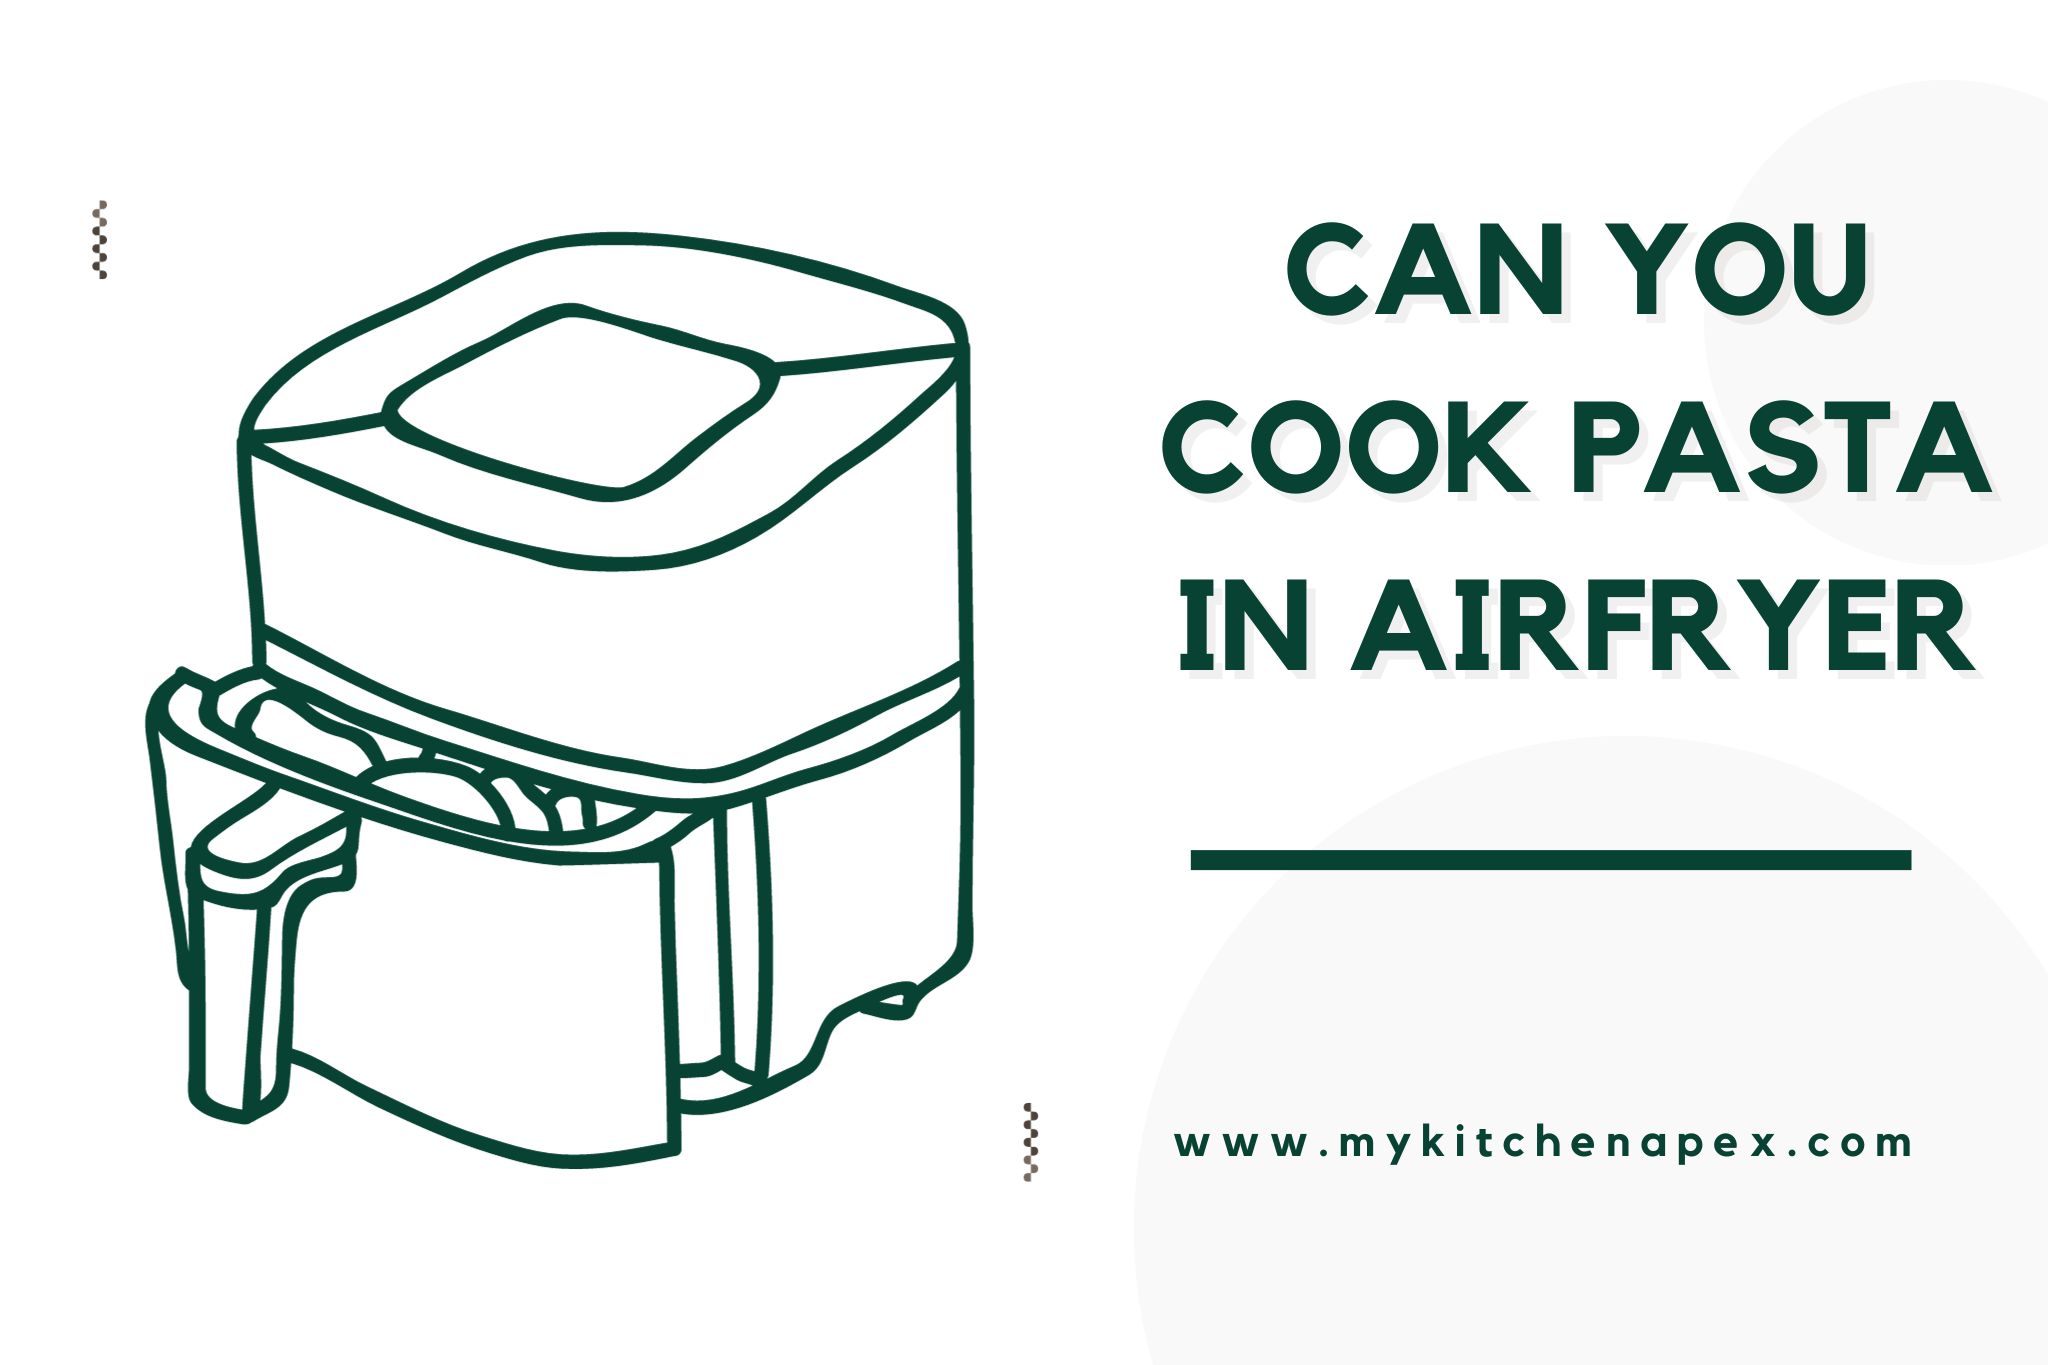 can you cook pasta in airfryer